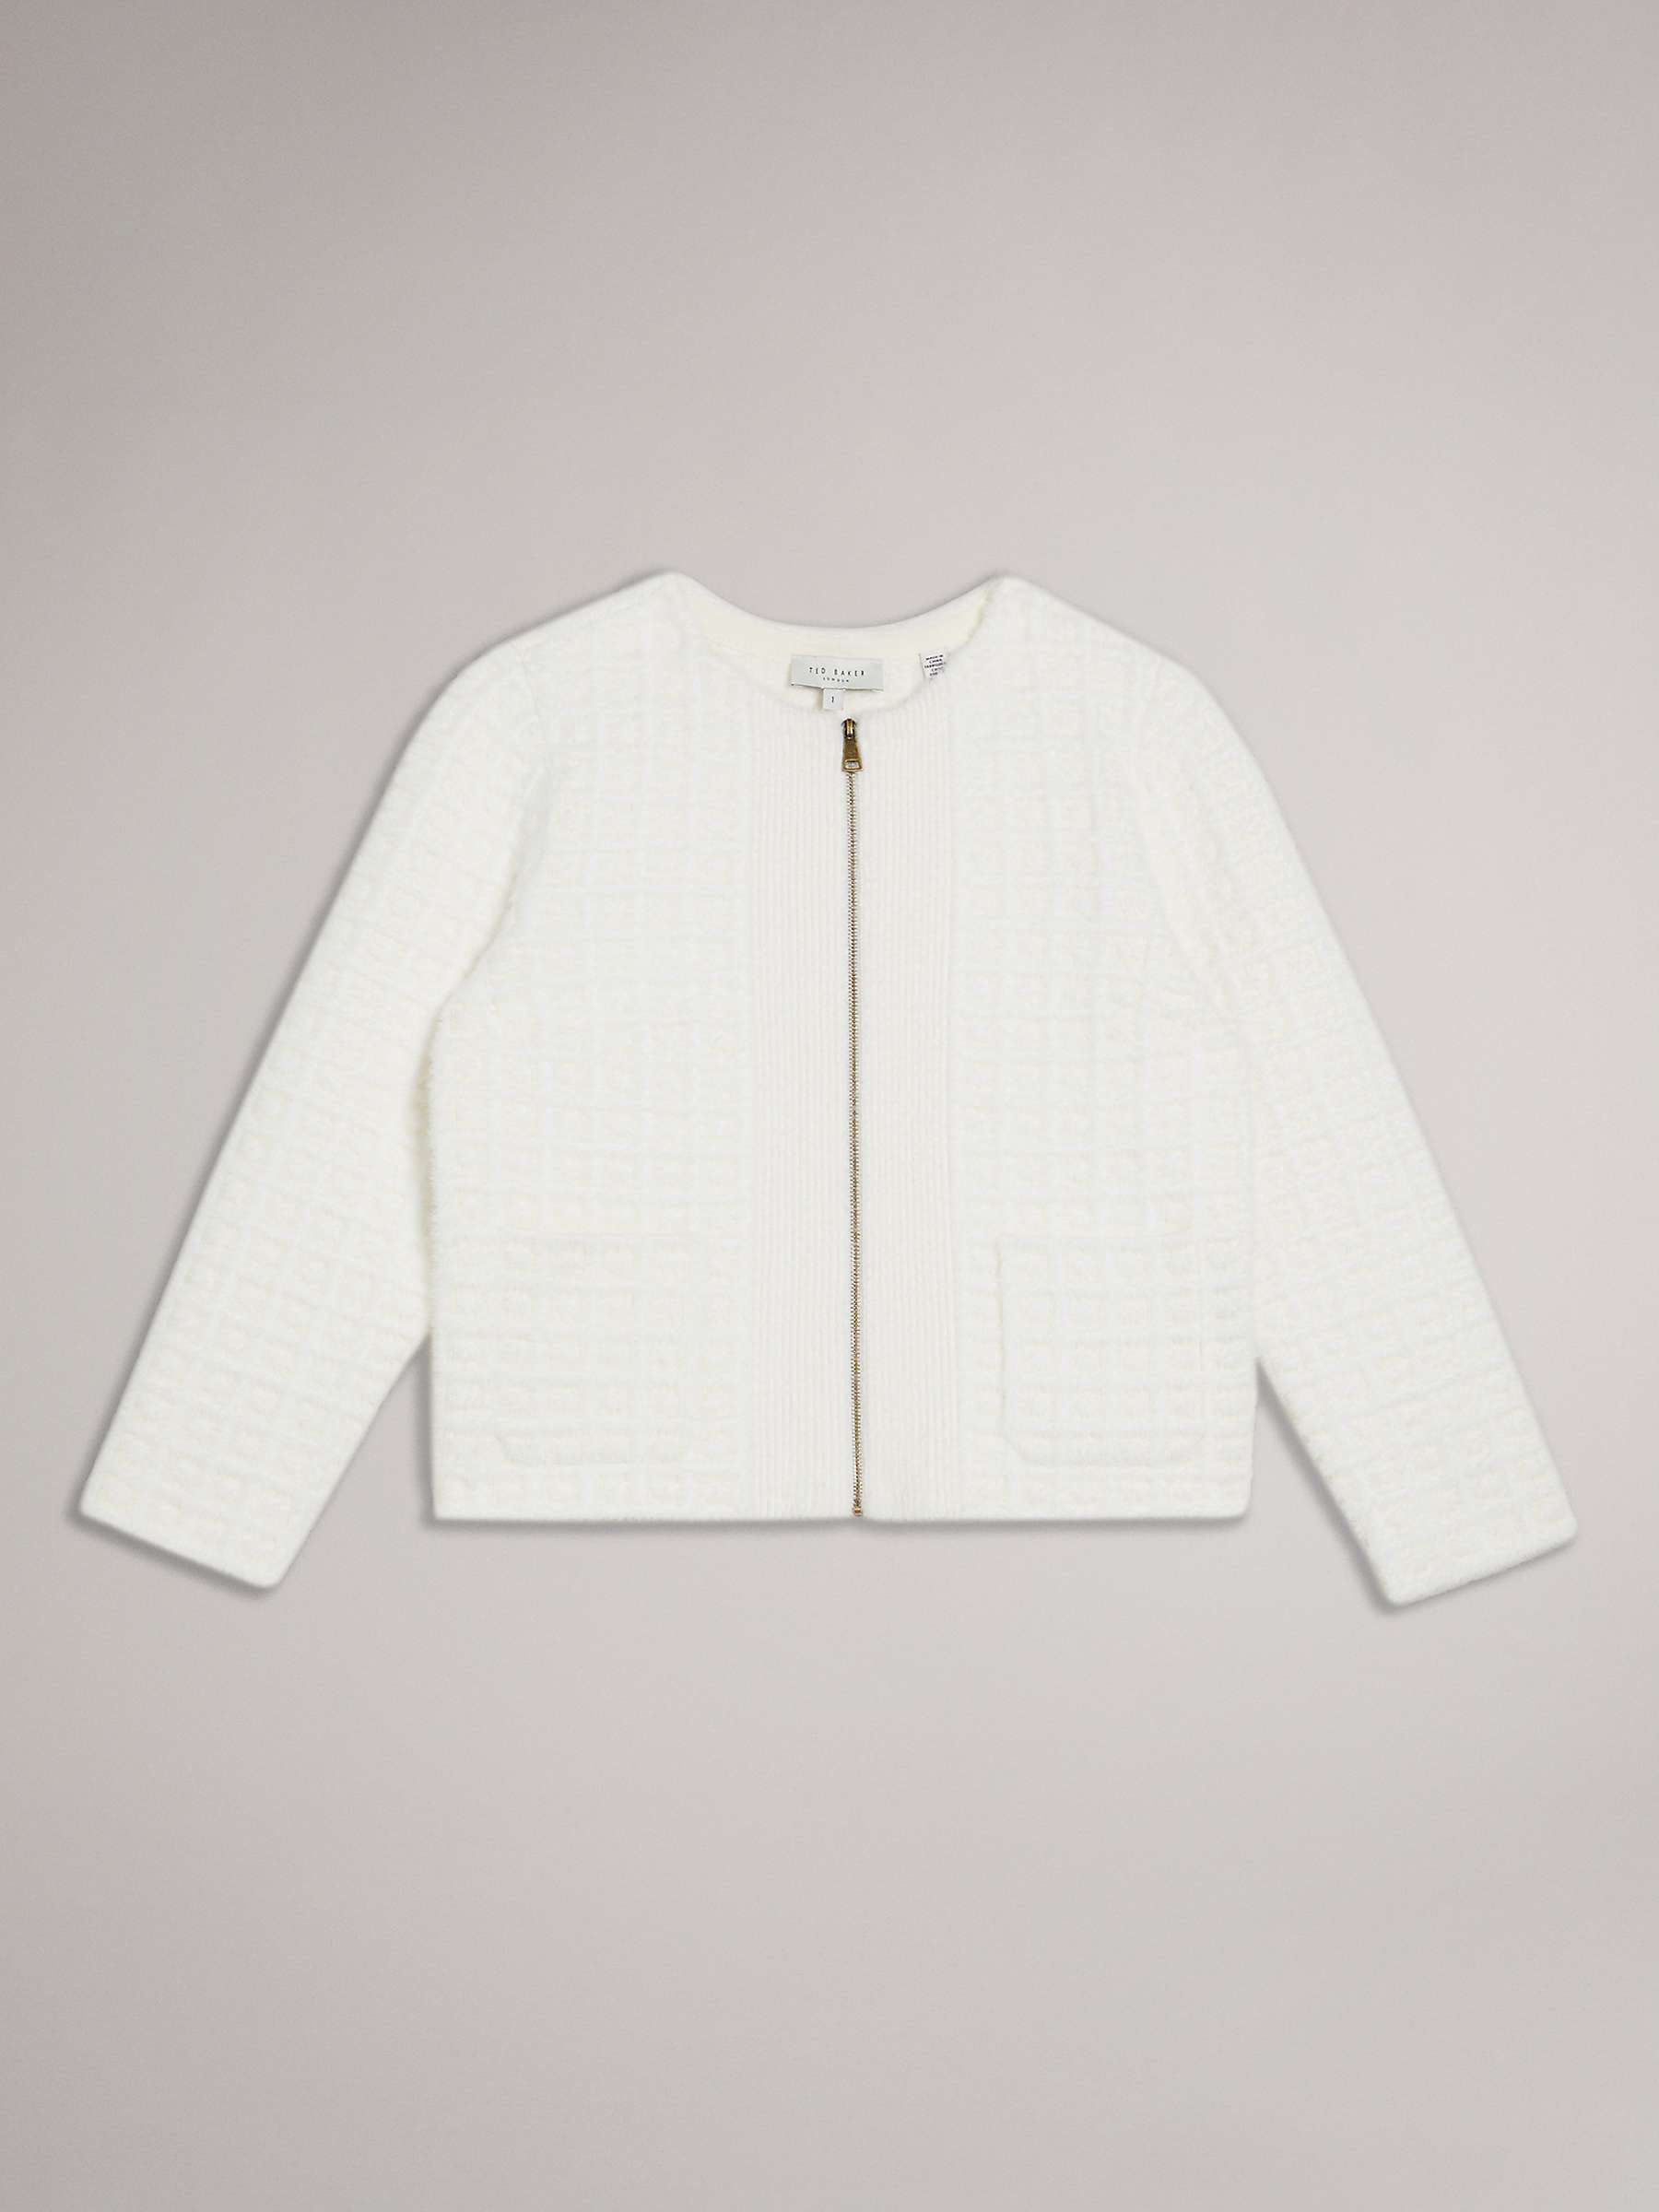 Buy Ted Baker Ulee Jacquard Check Knit Zip Front Cardigan, White Online at johnlewis.com